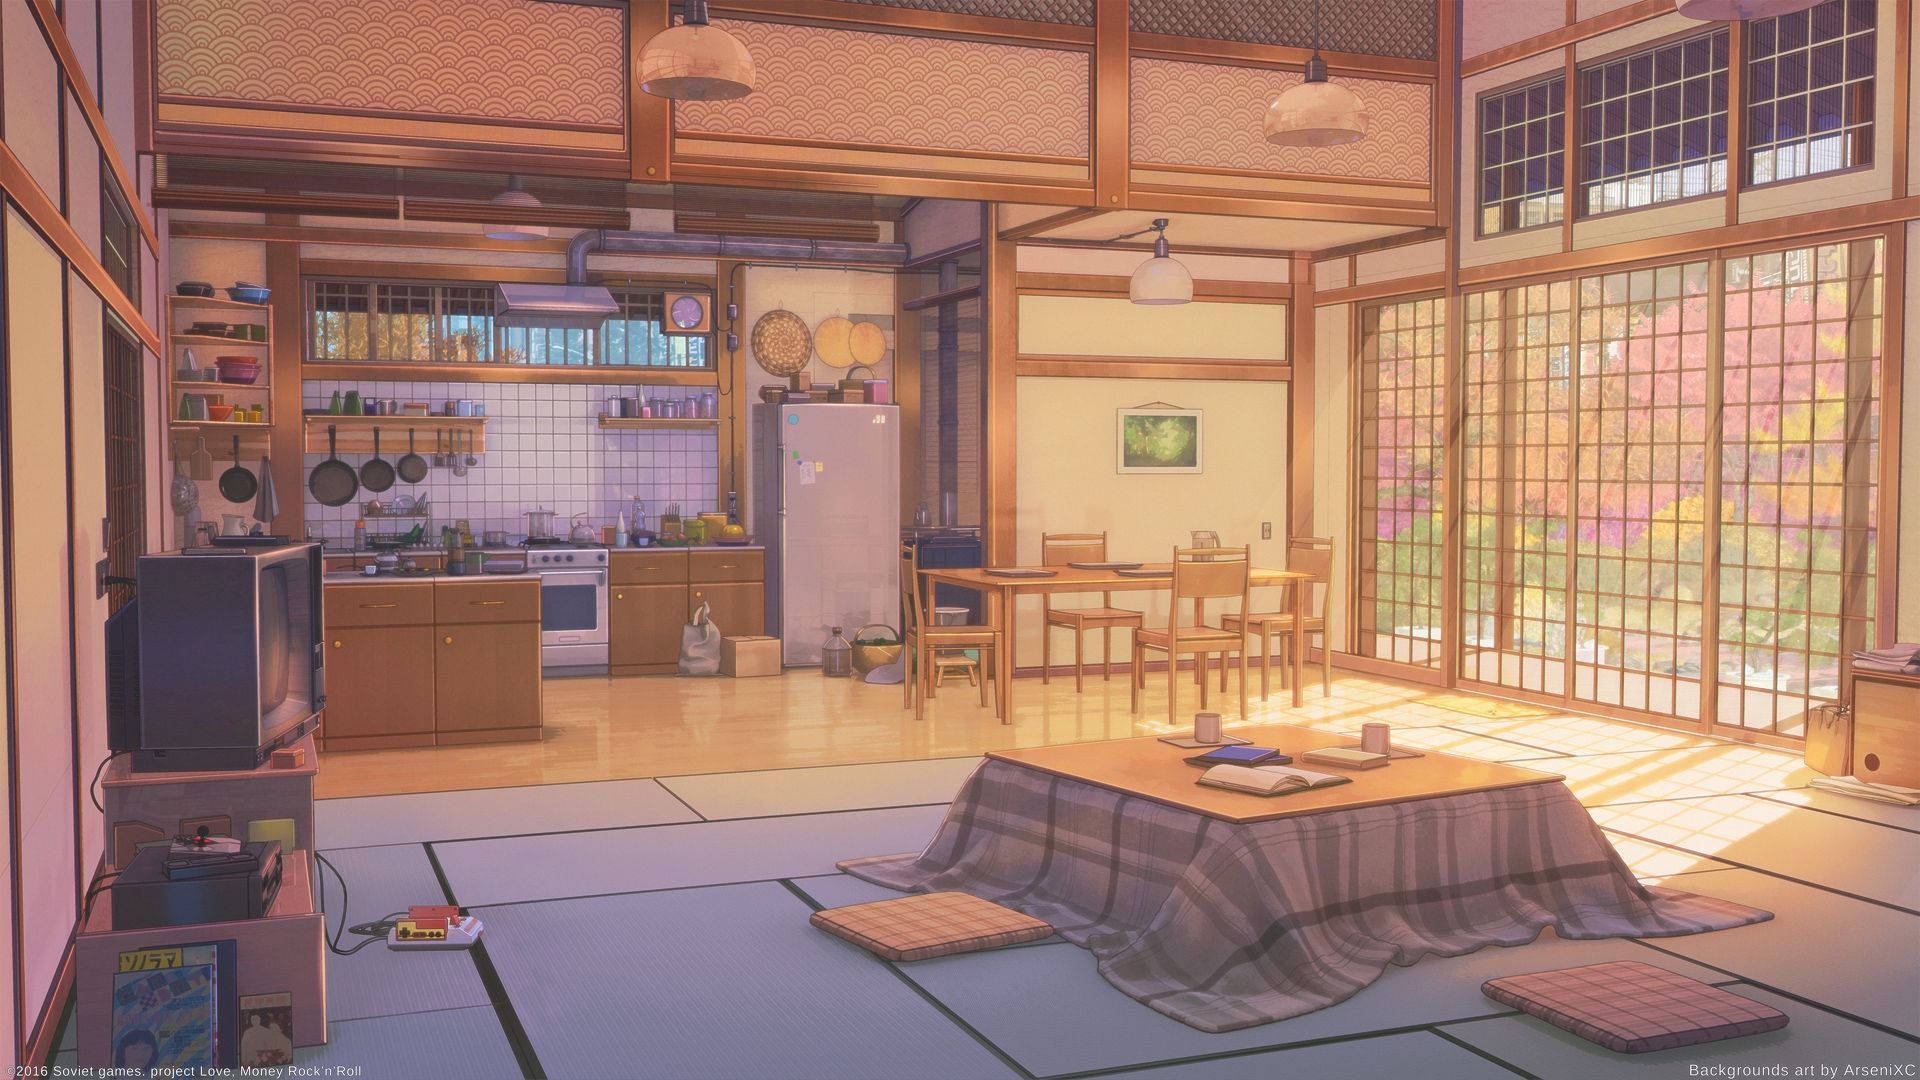 Download 1920x1080 Anime Room, Kitchen, Inside The Building